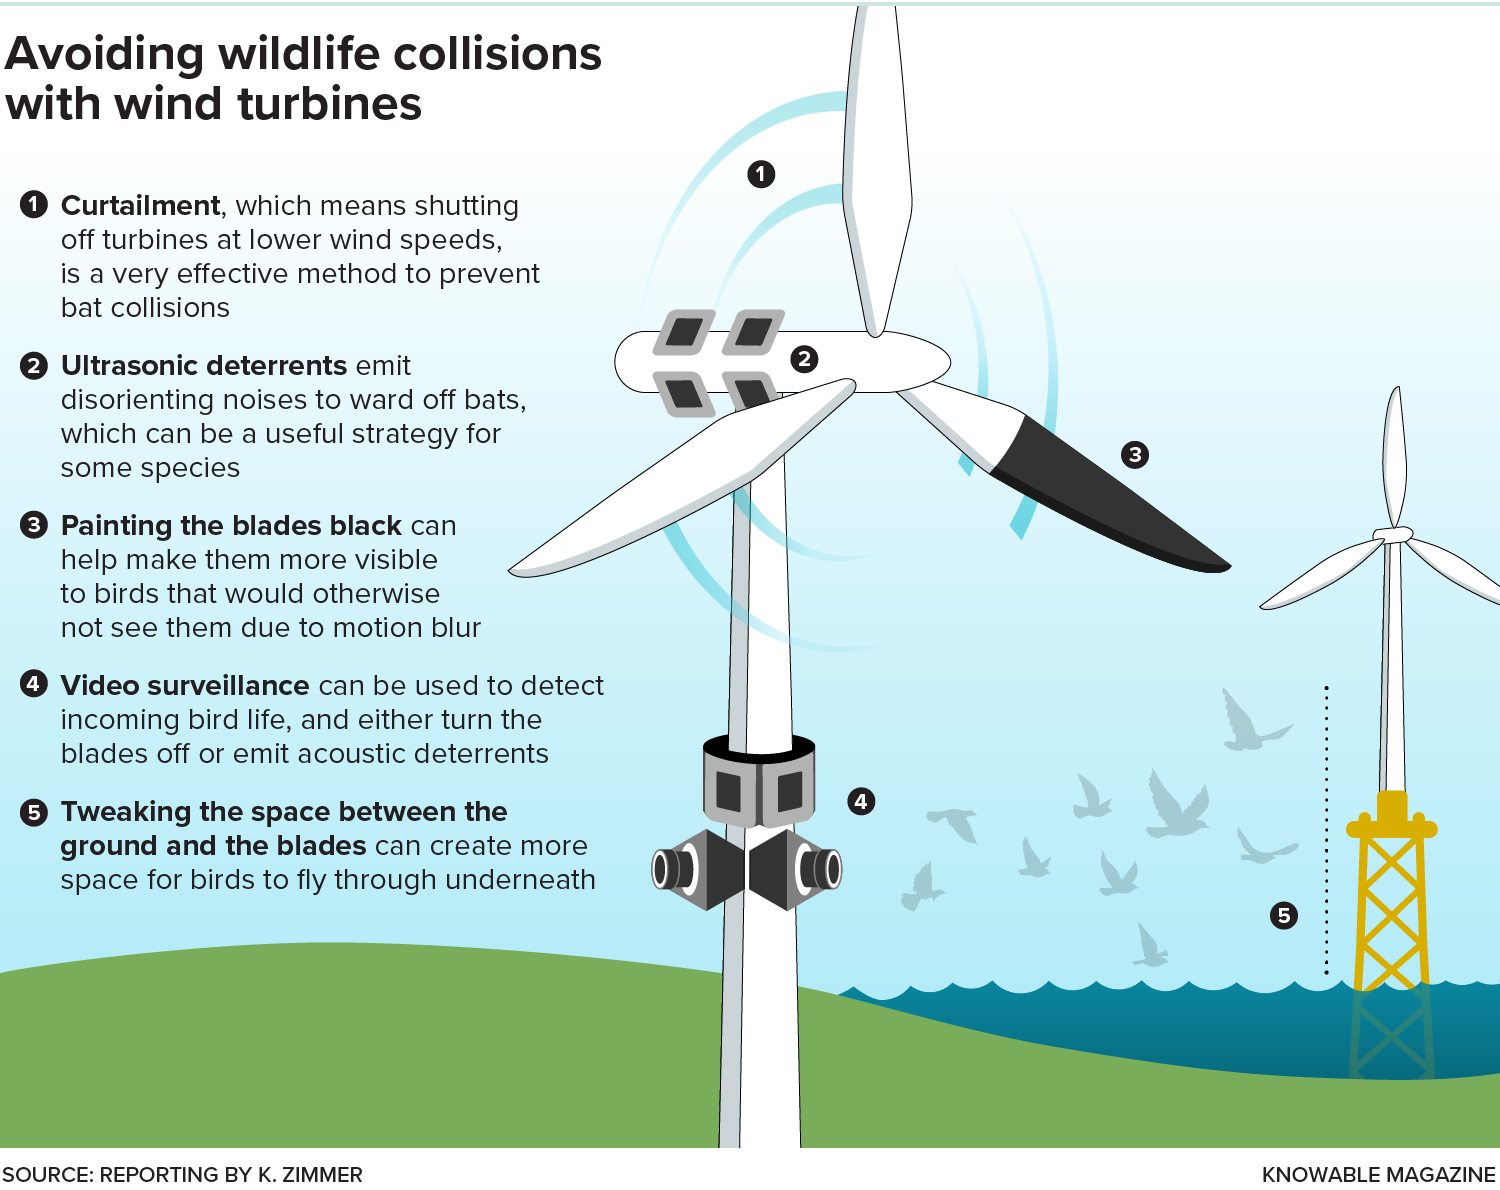 A graphic shows various ways to mitigate bat and bird deaths from wind turbines: curtailment, ultrasonic deterrents, painting the blades, video surveillance and tweaking the space between ground and blades.